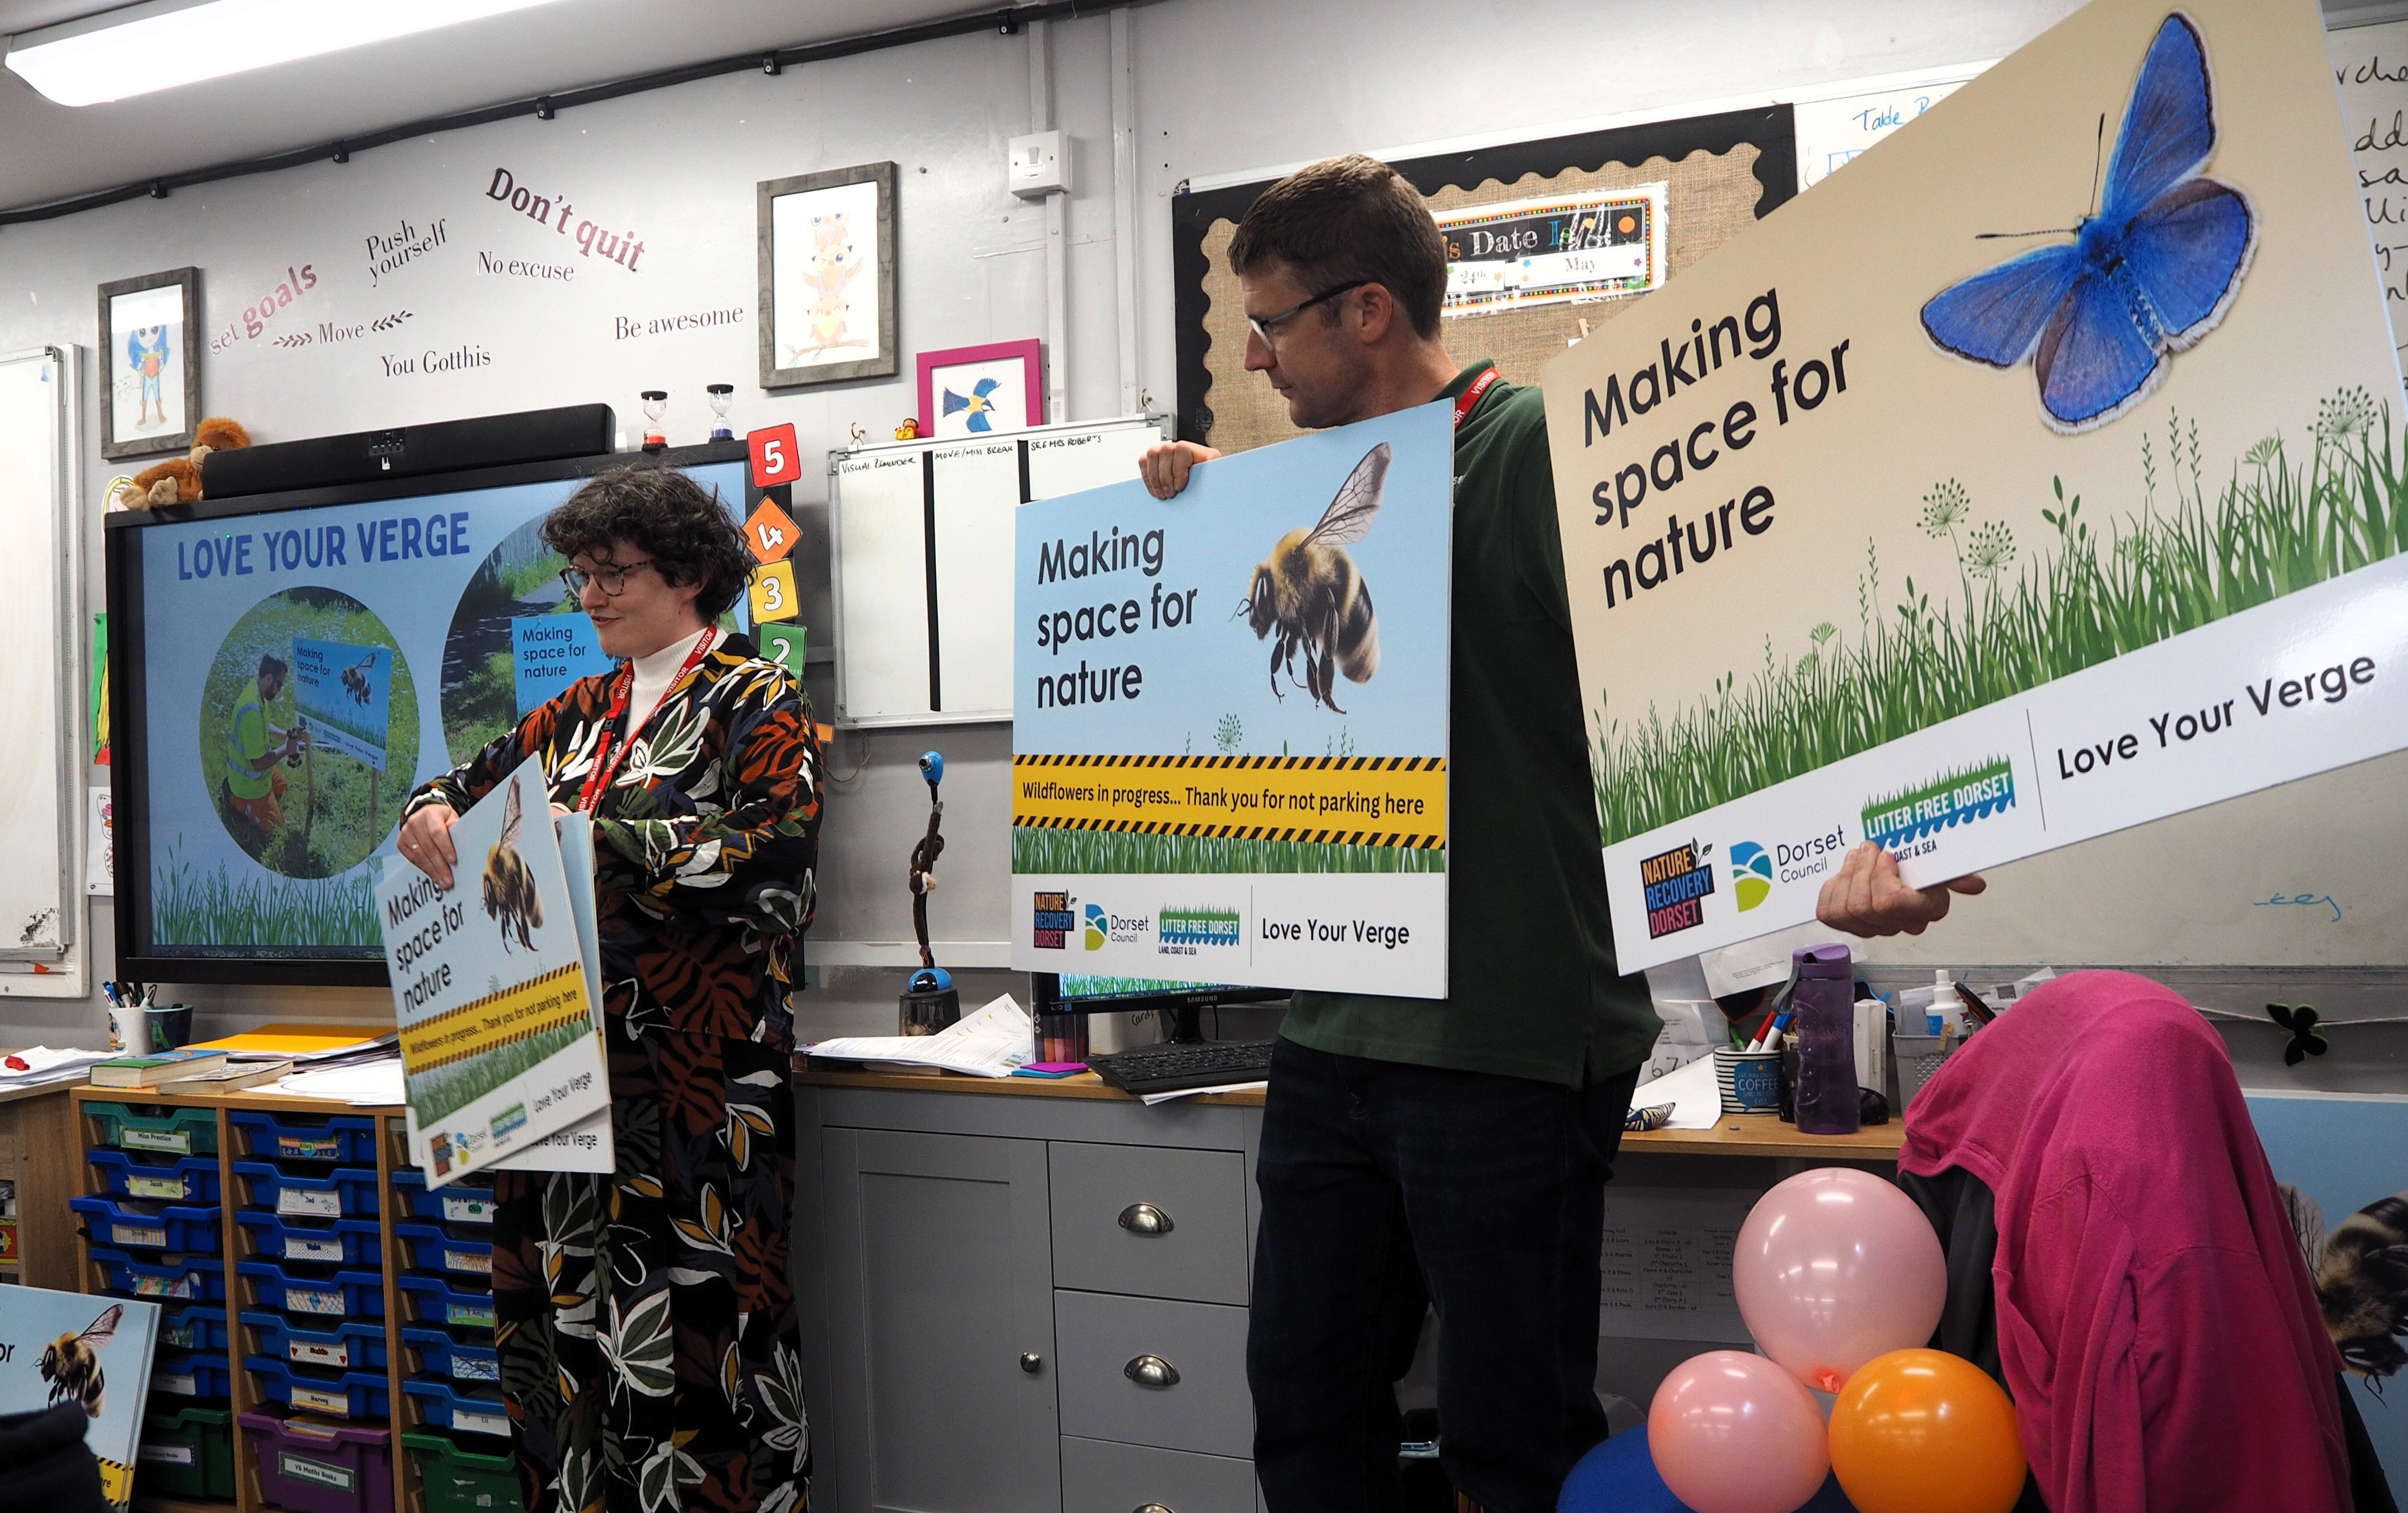 two council employees hold up 'making space for nature' signs at the front of a classroom